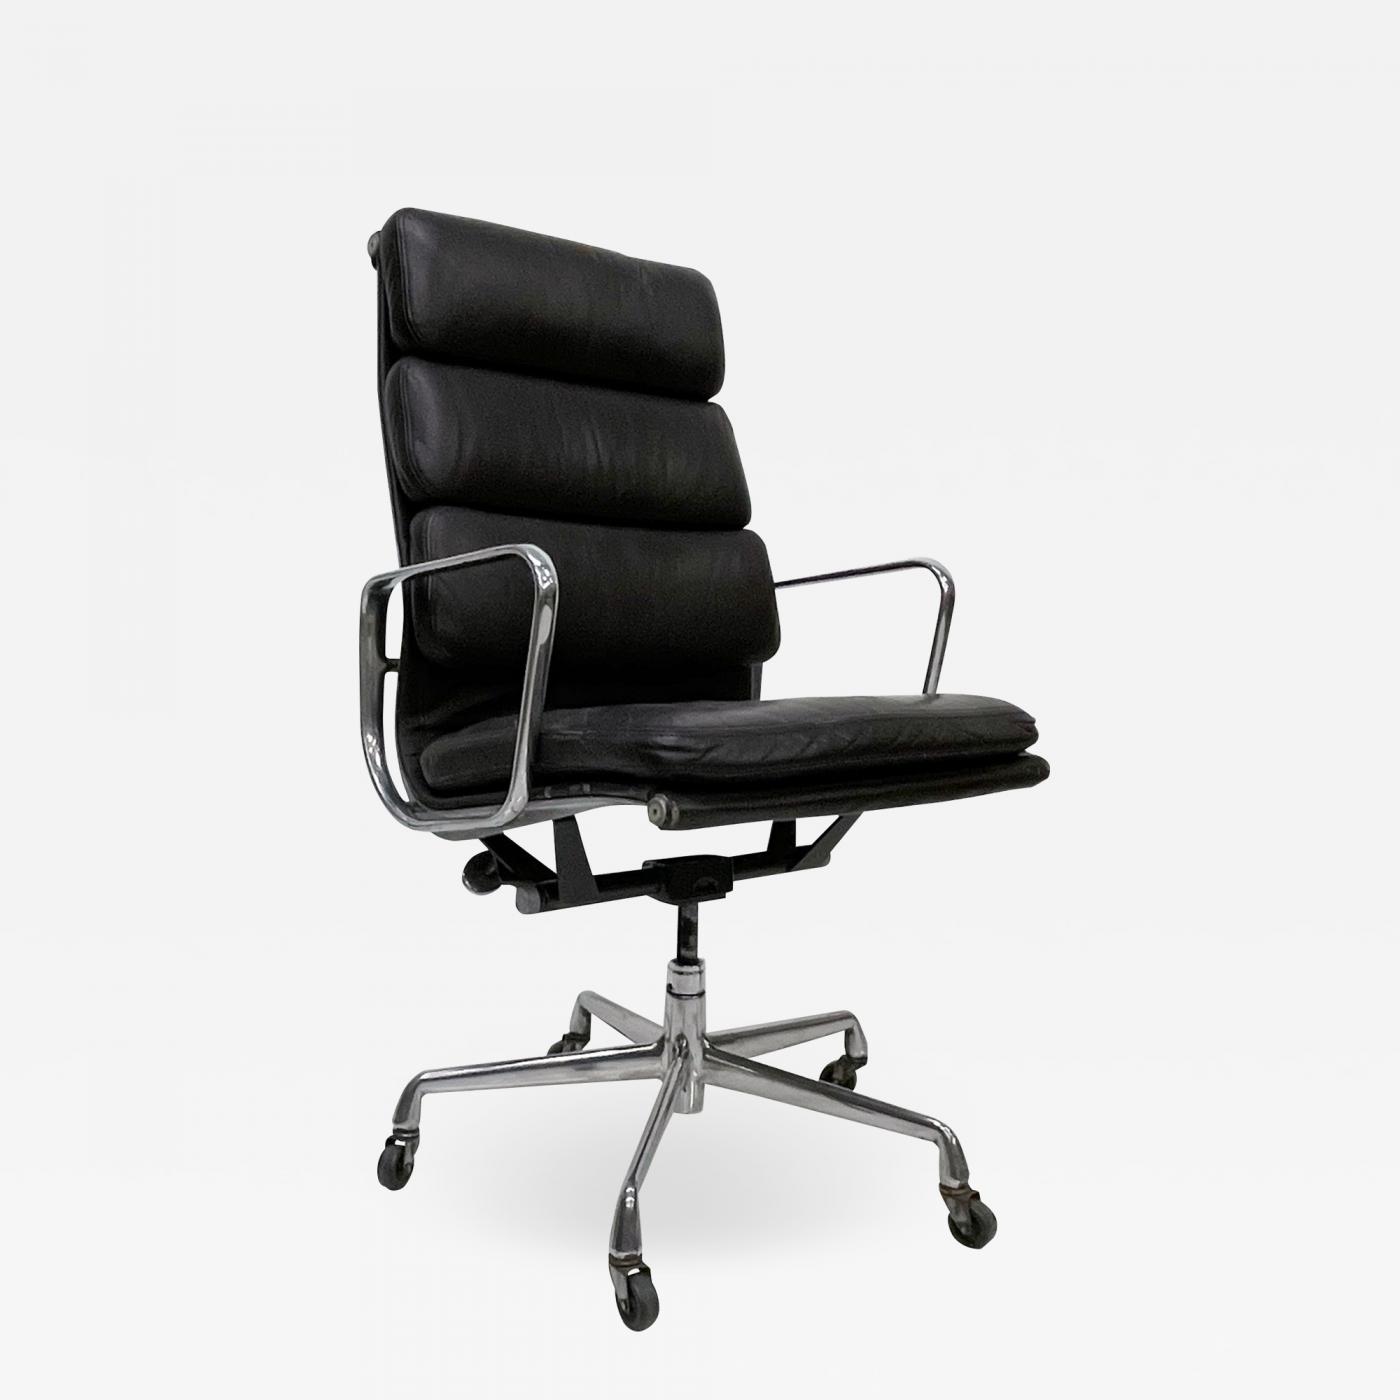 Charles Eames - Soft Pad Aluminum Group Office Chair Miller Vitra Leather